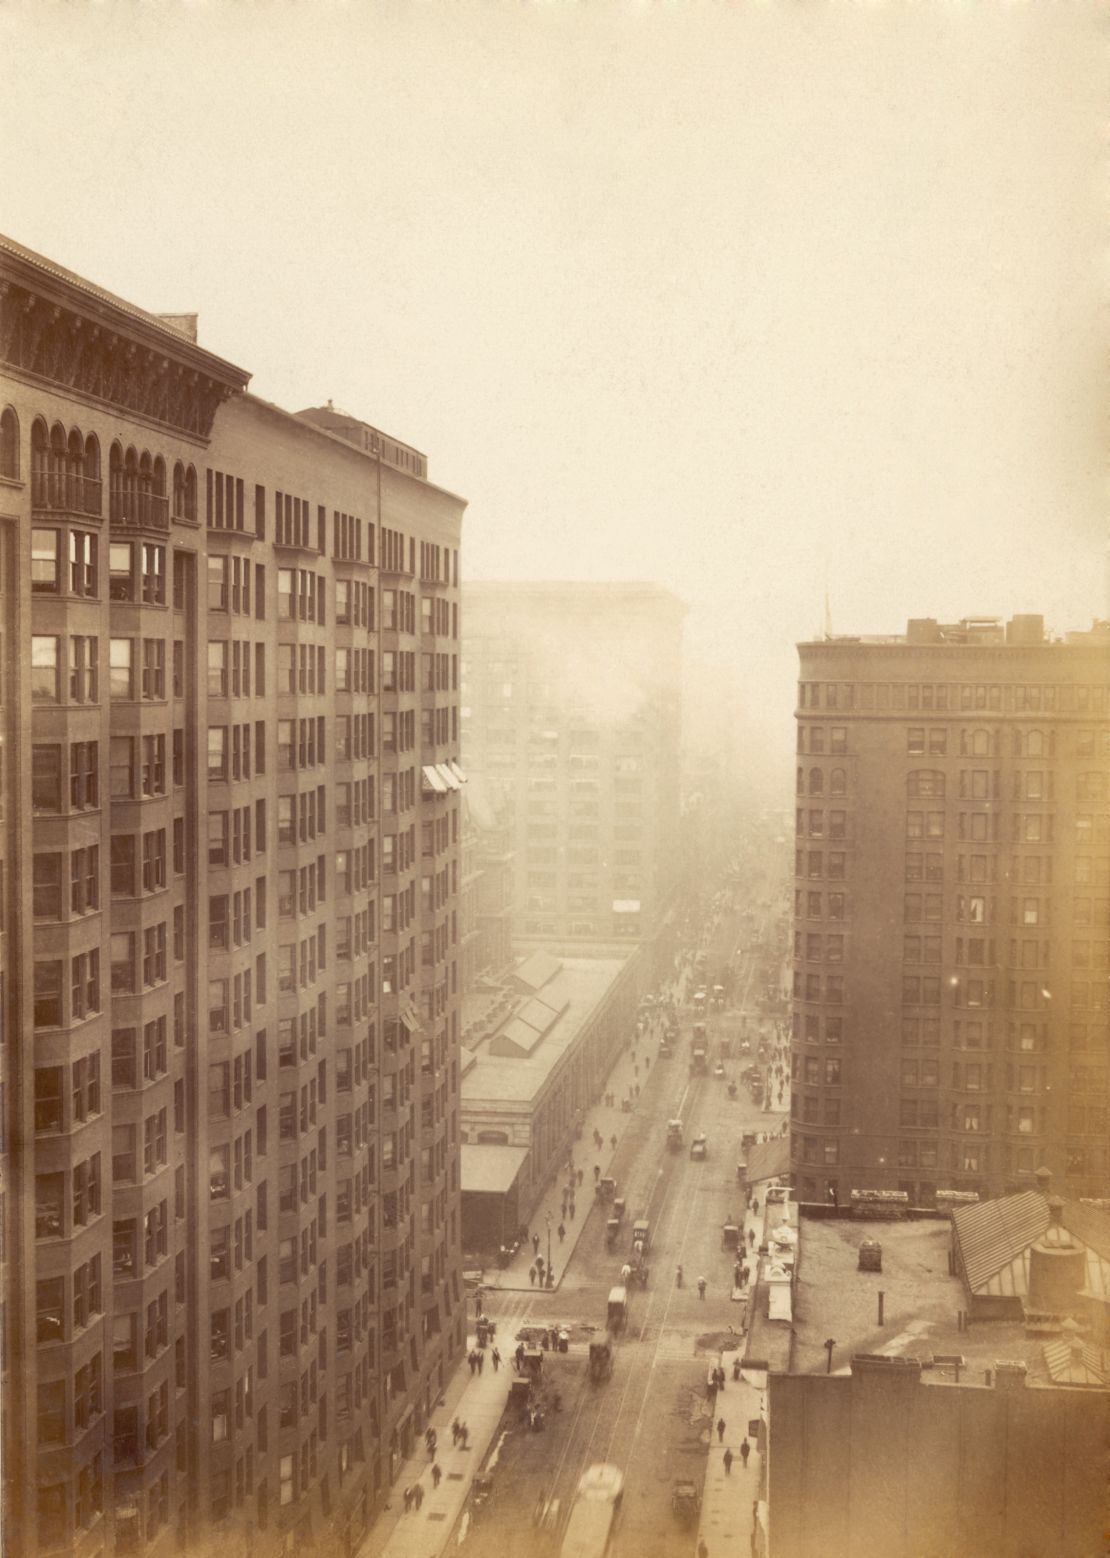 The Monadnock building on the left, photographed from a neighboring skyscraper in 1895. 